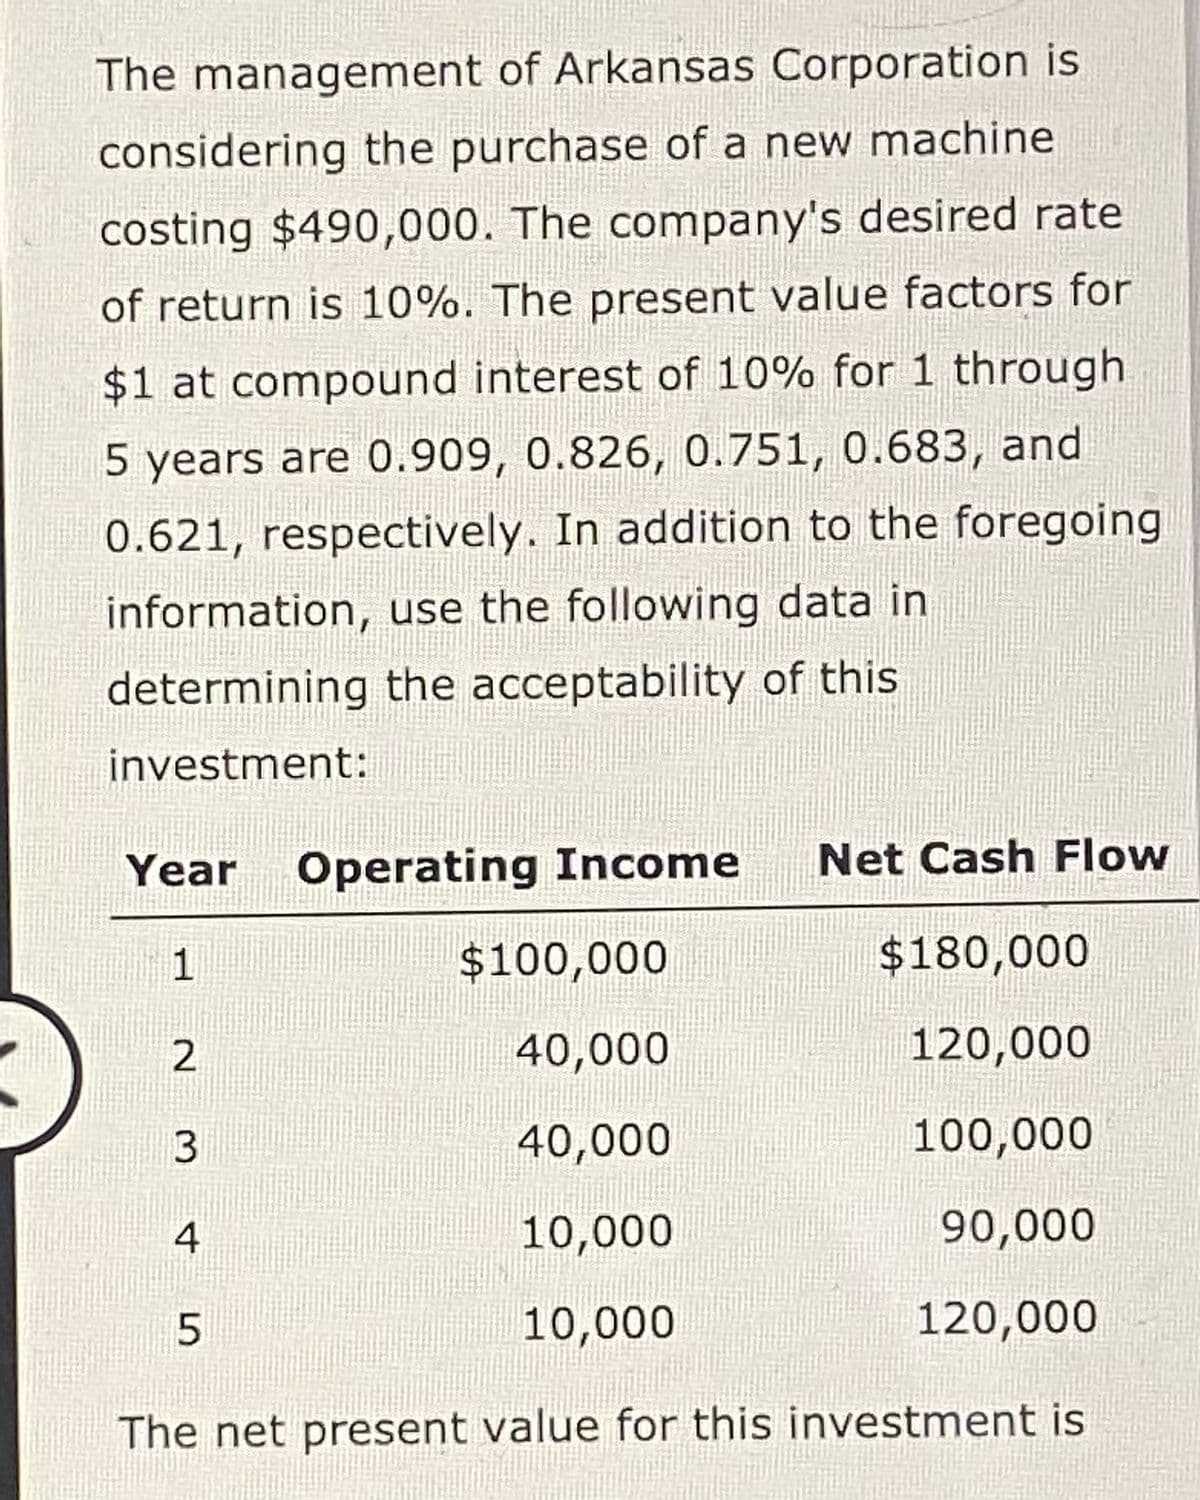 The management of Arkansas Corporation is
considering the purchase of a new machine
costing $490,000. The company's desired rate
of return is 10%. The present value factors for
$1 at compound interest of 10% for 1 through
5 years are 0.909, 0.826, 0.751, 0.683, and
0.621, respectively. In addition to the foregoing
information, use the following data in
determining the acceptability of this
investment:
Year Operating Income
1
2
3
4
5
$100,000
40,000
40,000
10,000
10,000
Net Cash Flow
$180,000
120,000
100,000
90,000
120,000
The net present value for this investment is